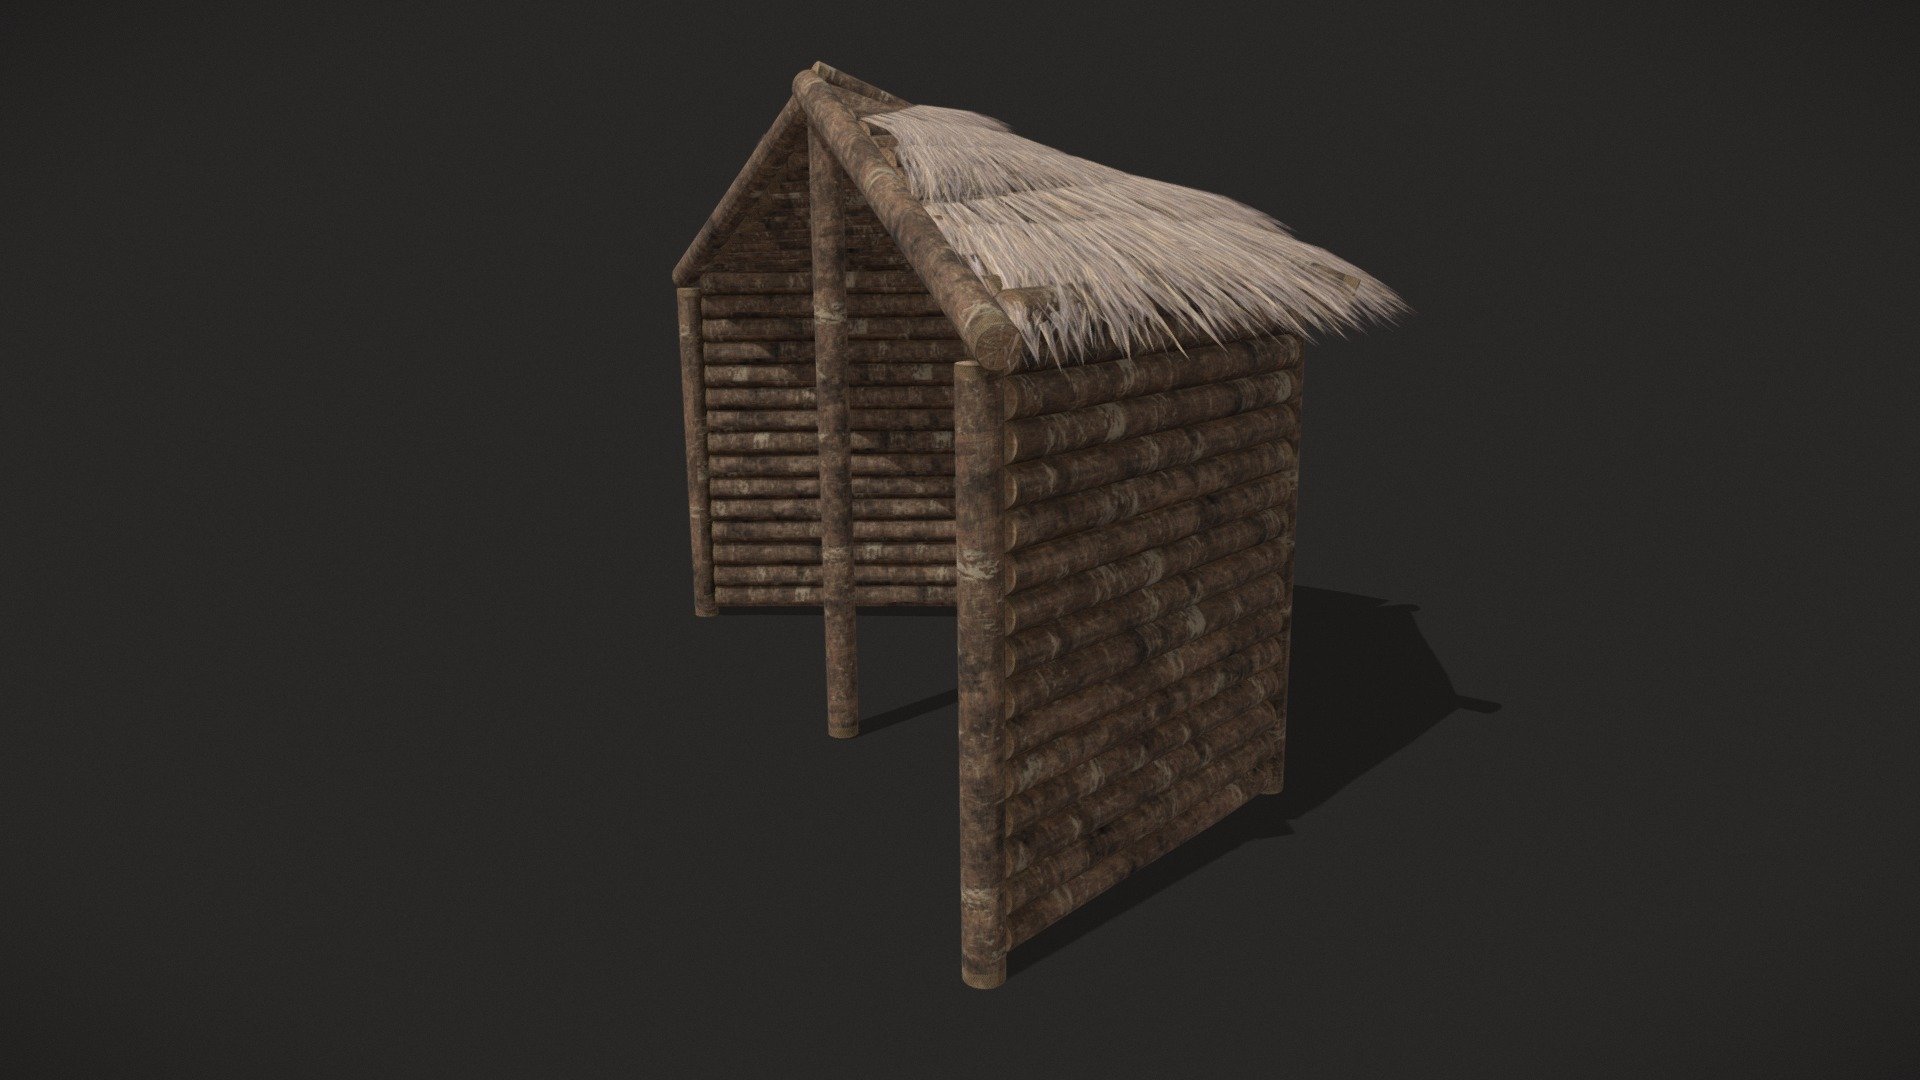 Modular_Housing_Hut_D

Includes 4 Texture Variety - Texture is made using Trim Sheets. UVs are Overlapping for Optimization 3d model